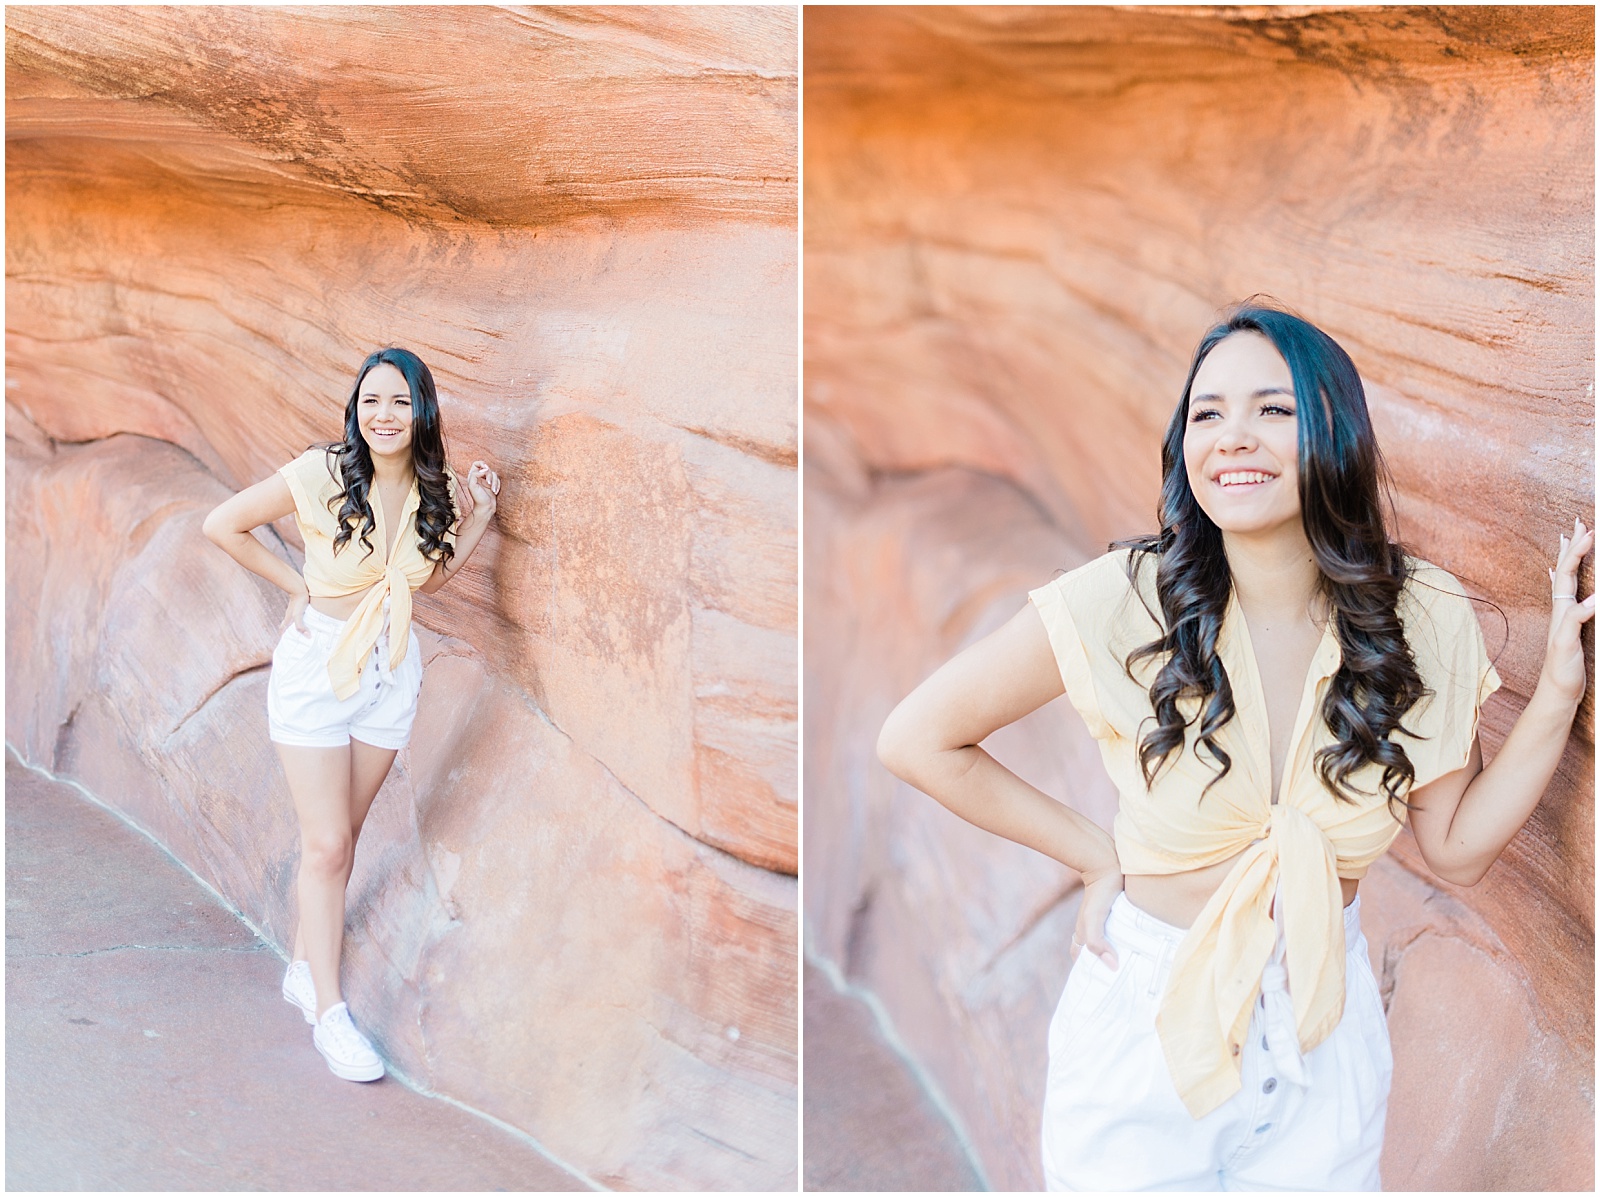 Disneyland Big Thunder Trail Senior Session. Images by Mollie Jane Photography. To see more go to www.molliejanephotography.com.